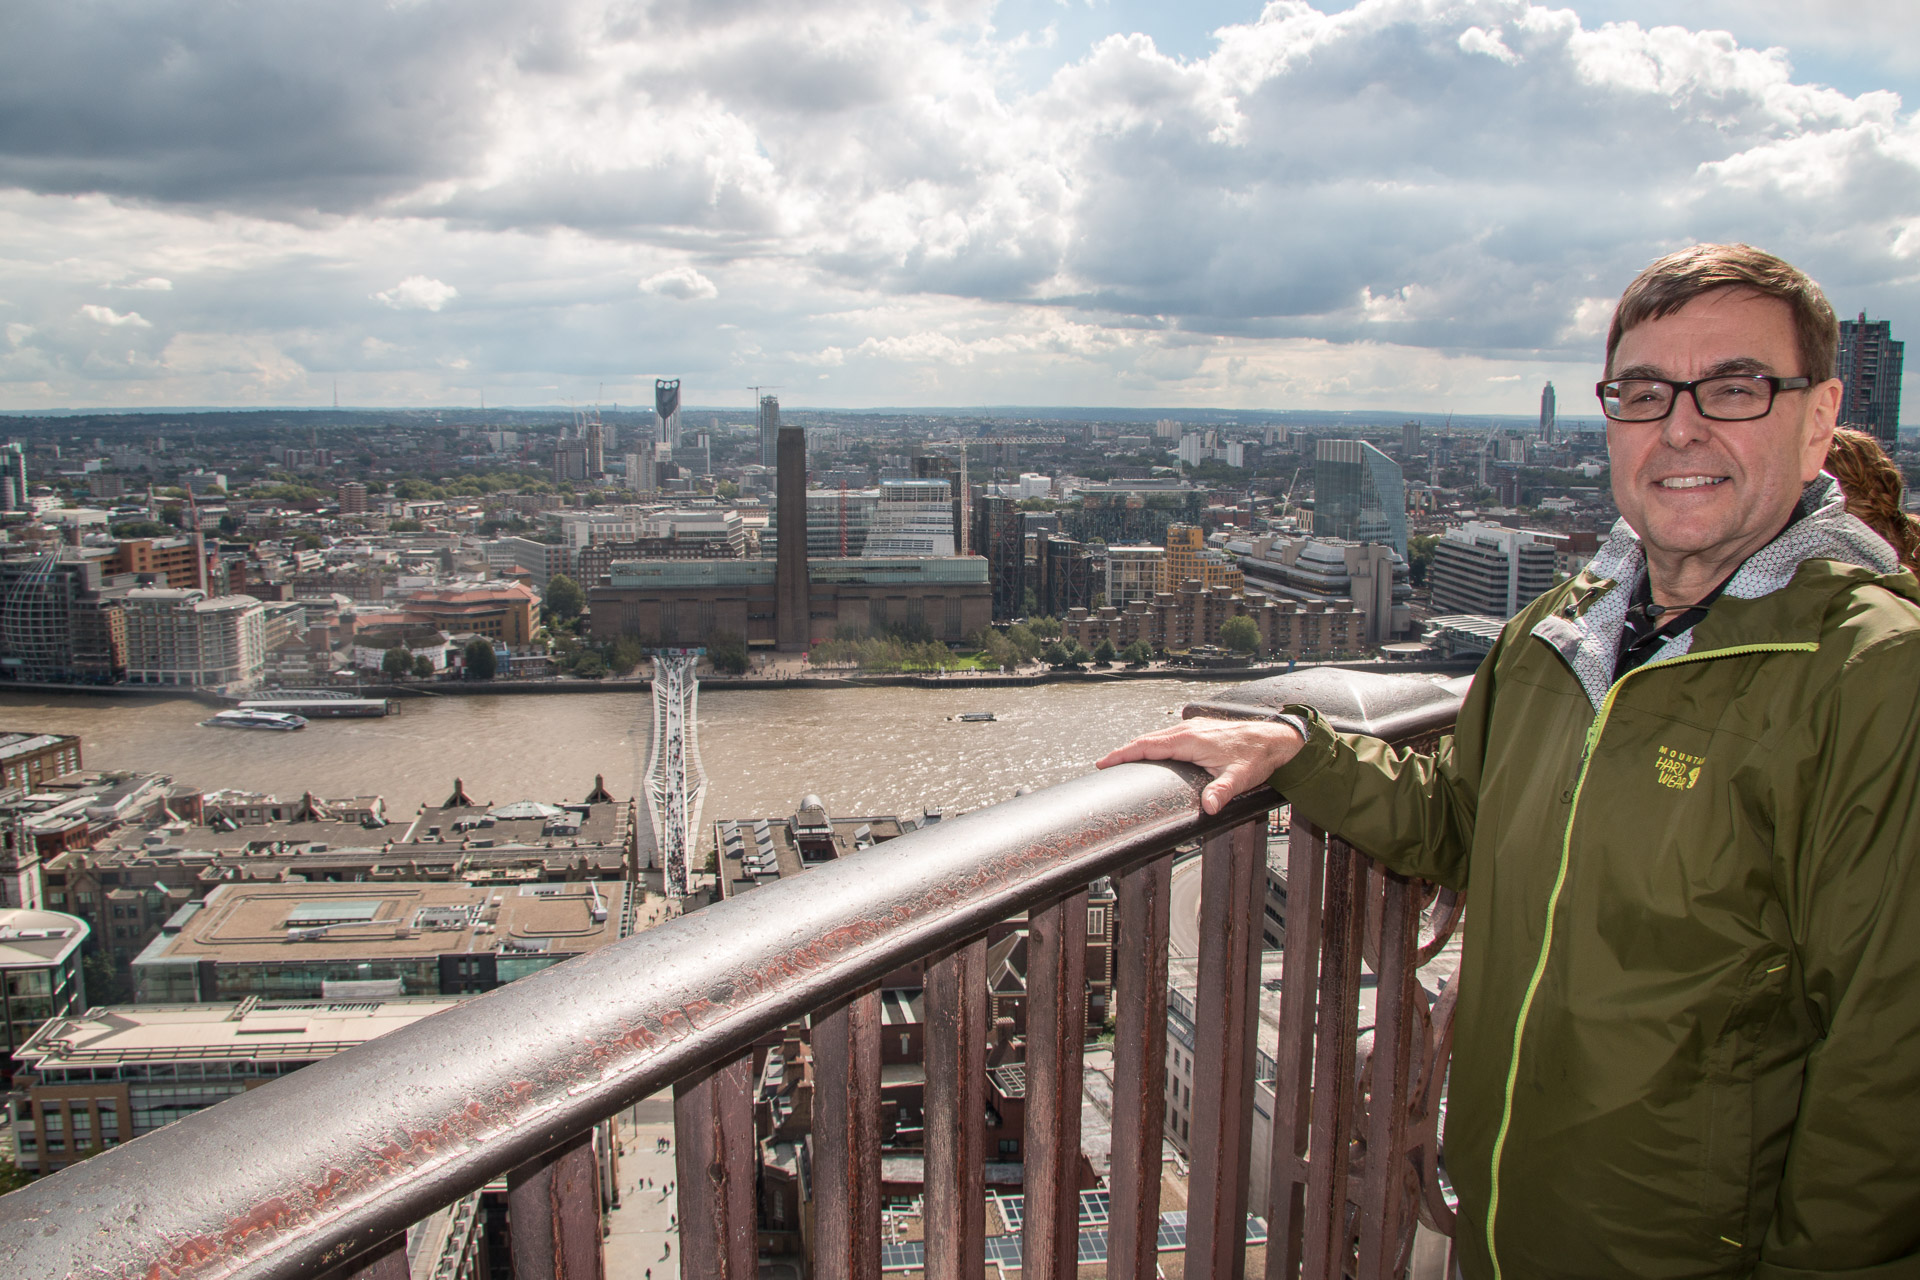 Paul at the Golden Galltery at the top of cupola of St. Paul's Cathedral in London